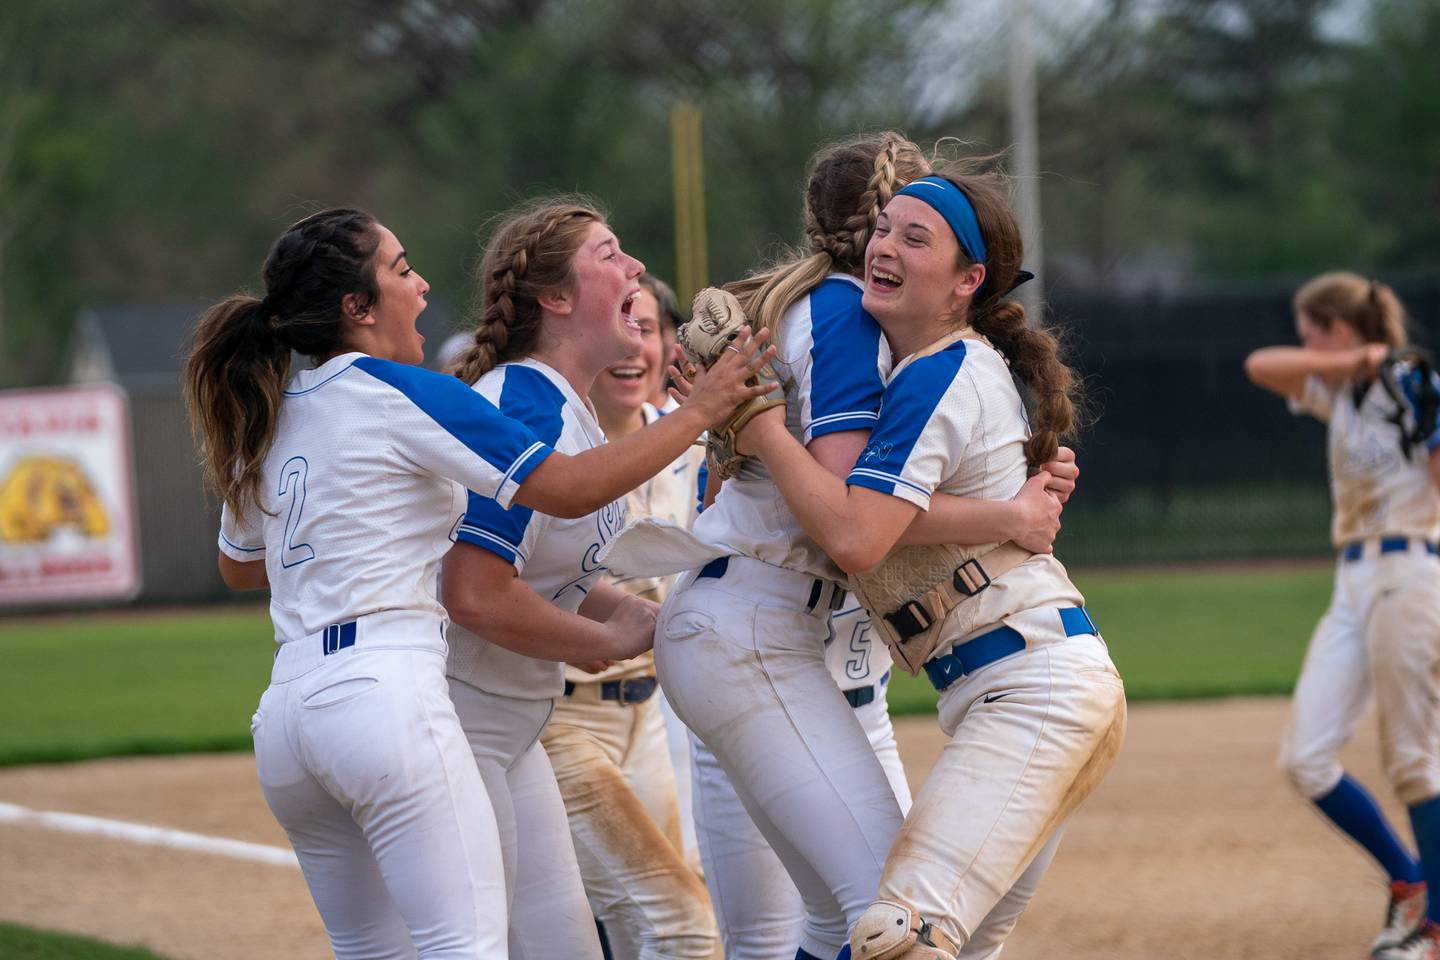 St. Charles North's Paige Murray (left) and St. Charles North's Sophia Olman (right) hugs as they celebrate their victory against Lake Park during a softball game at St. Charles North High School on Wednesday, May 11, 2022.